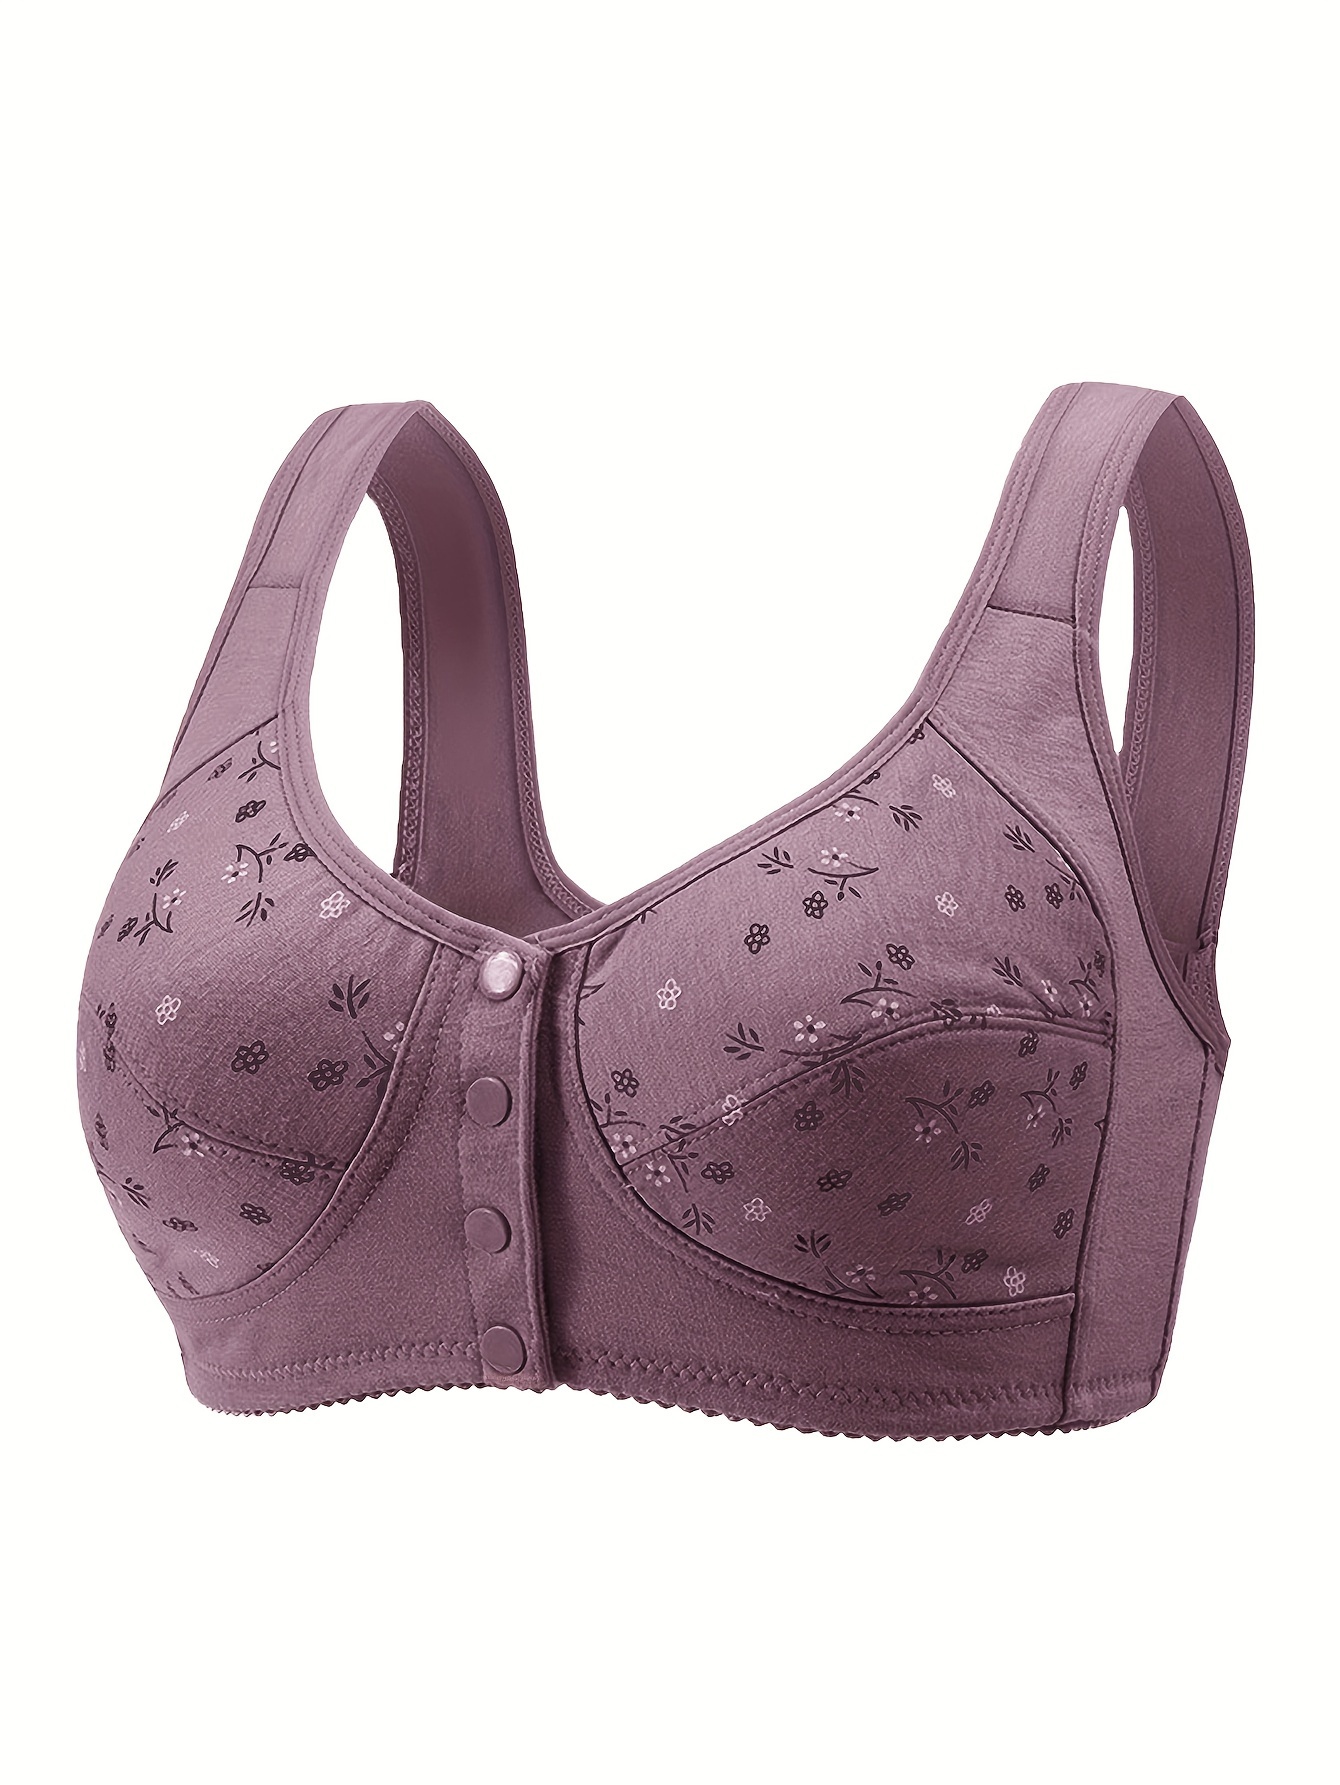 Front open button bra for women non paded